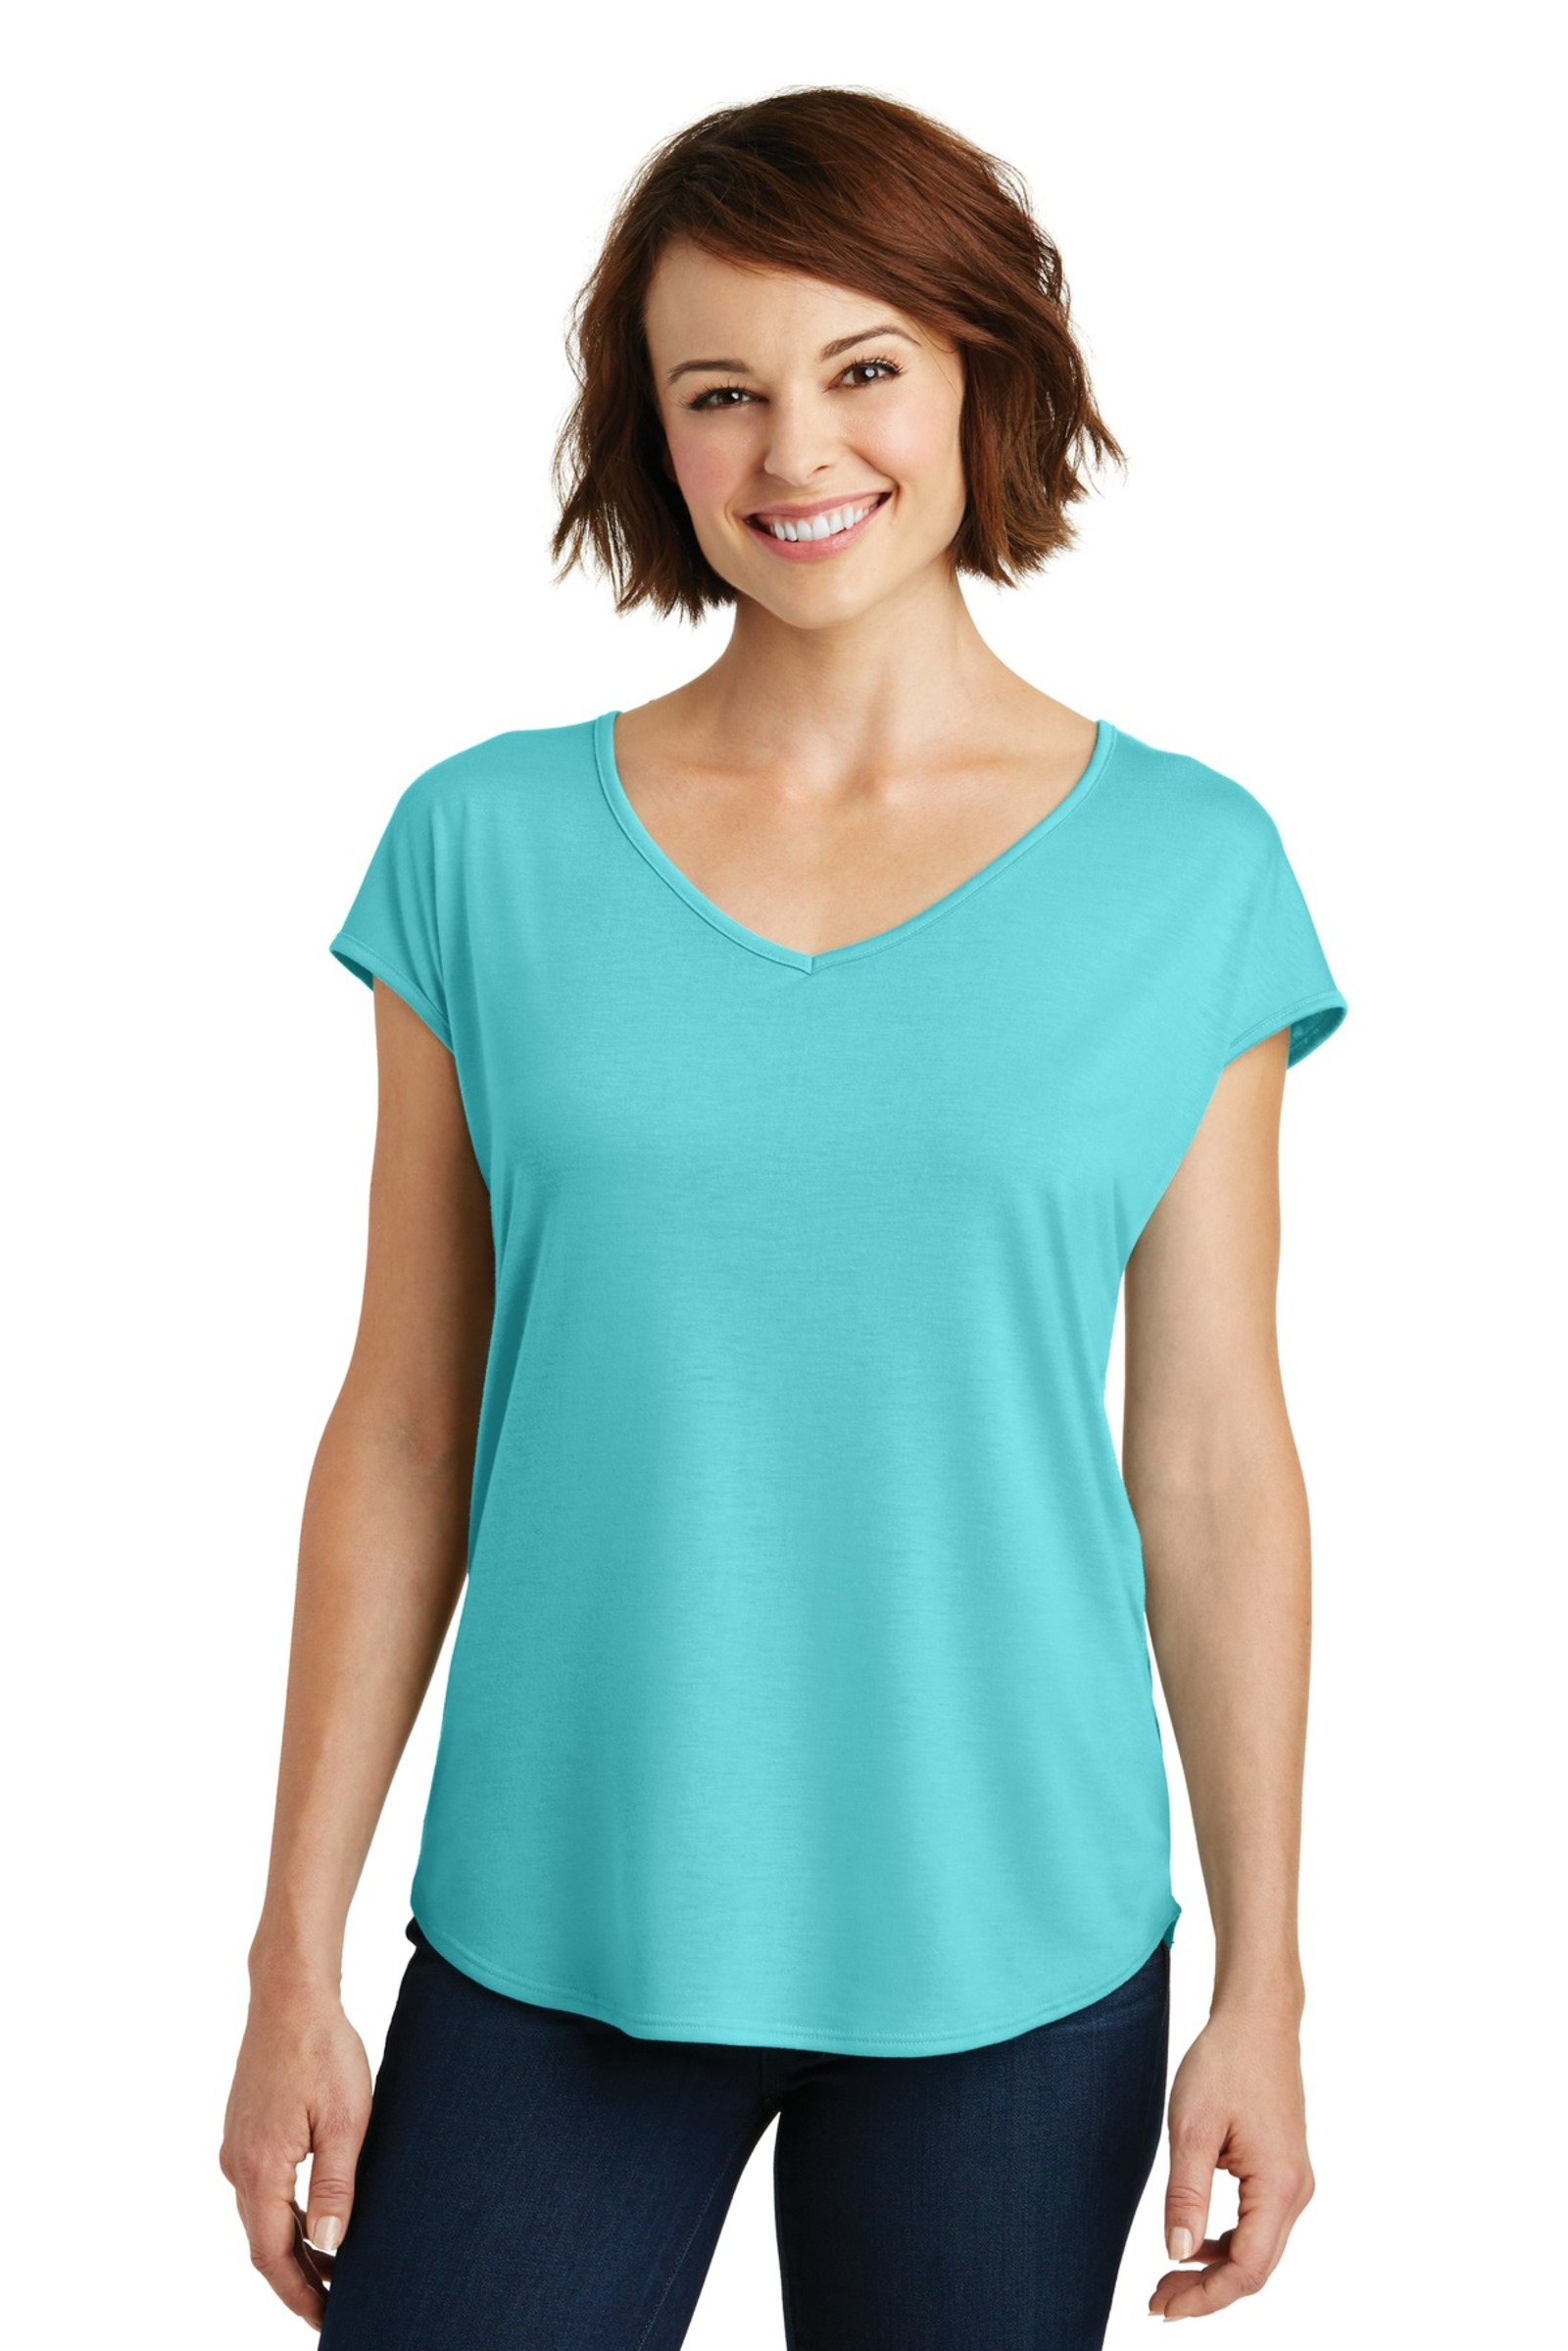 District Embroidered Women's Drapey Cross-Back Tee